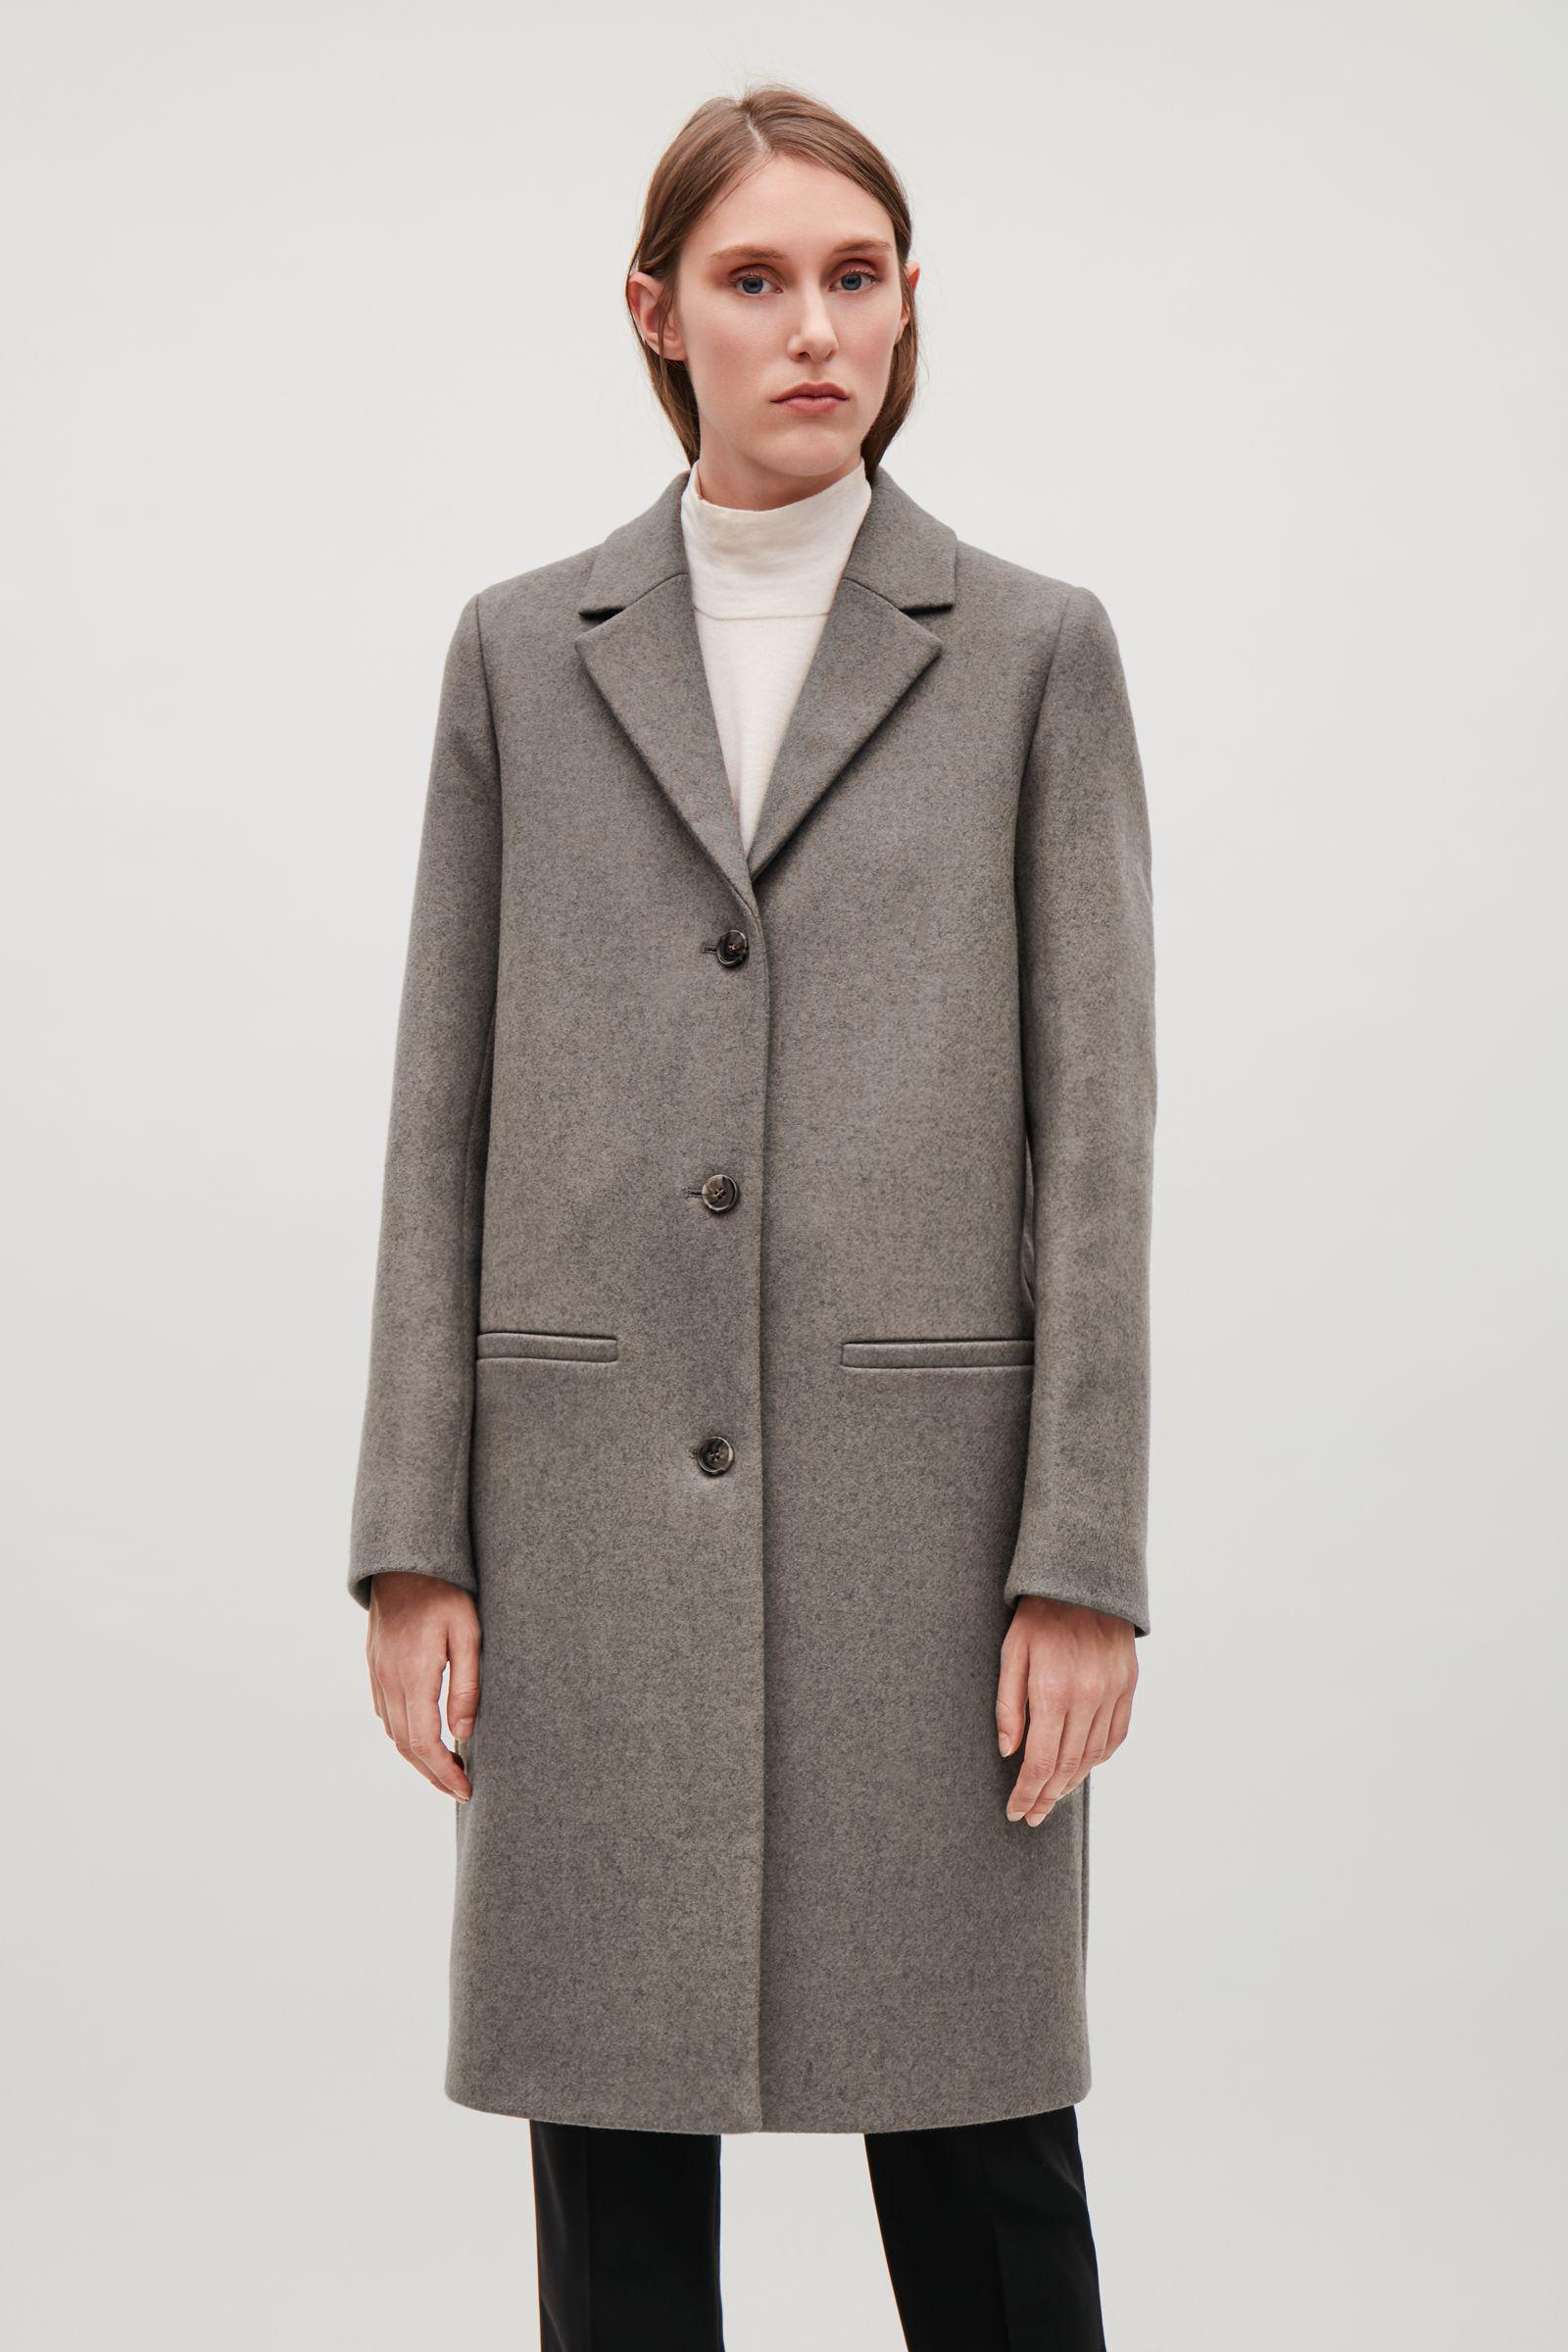 COS Tailored Wool Coat | Lyst